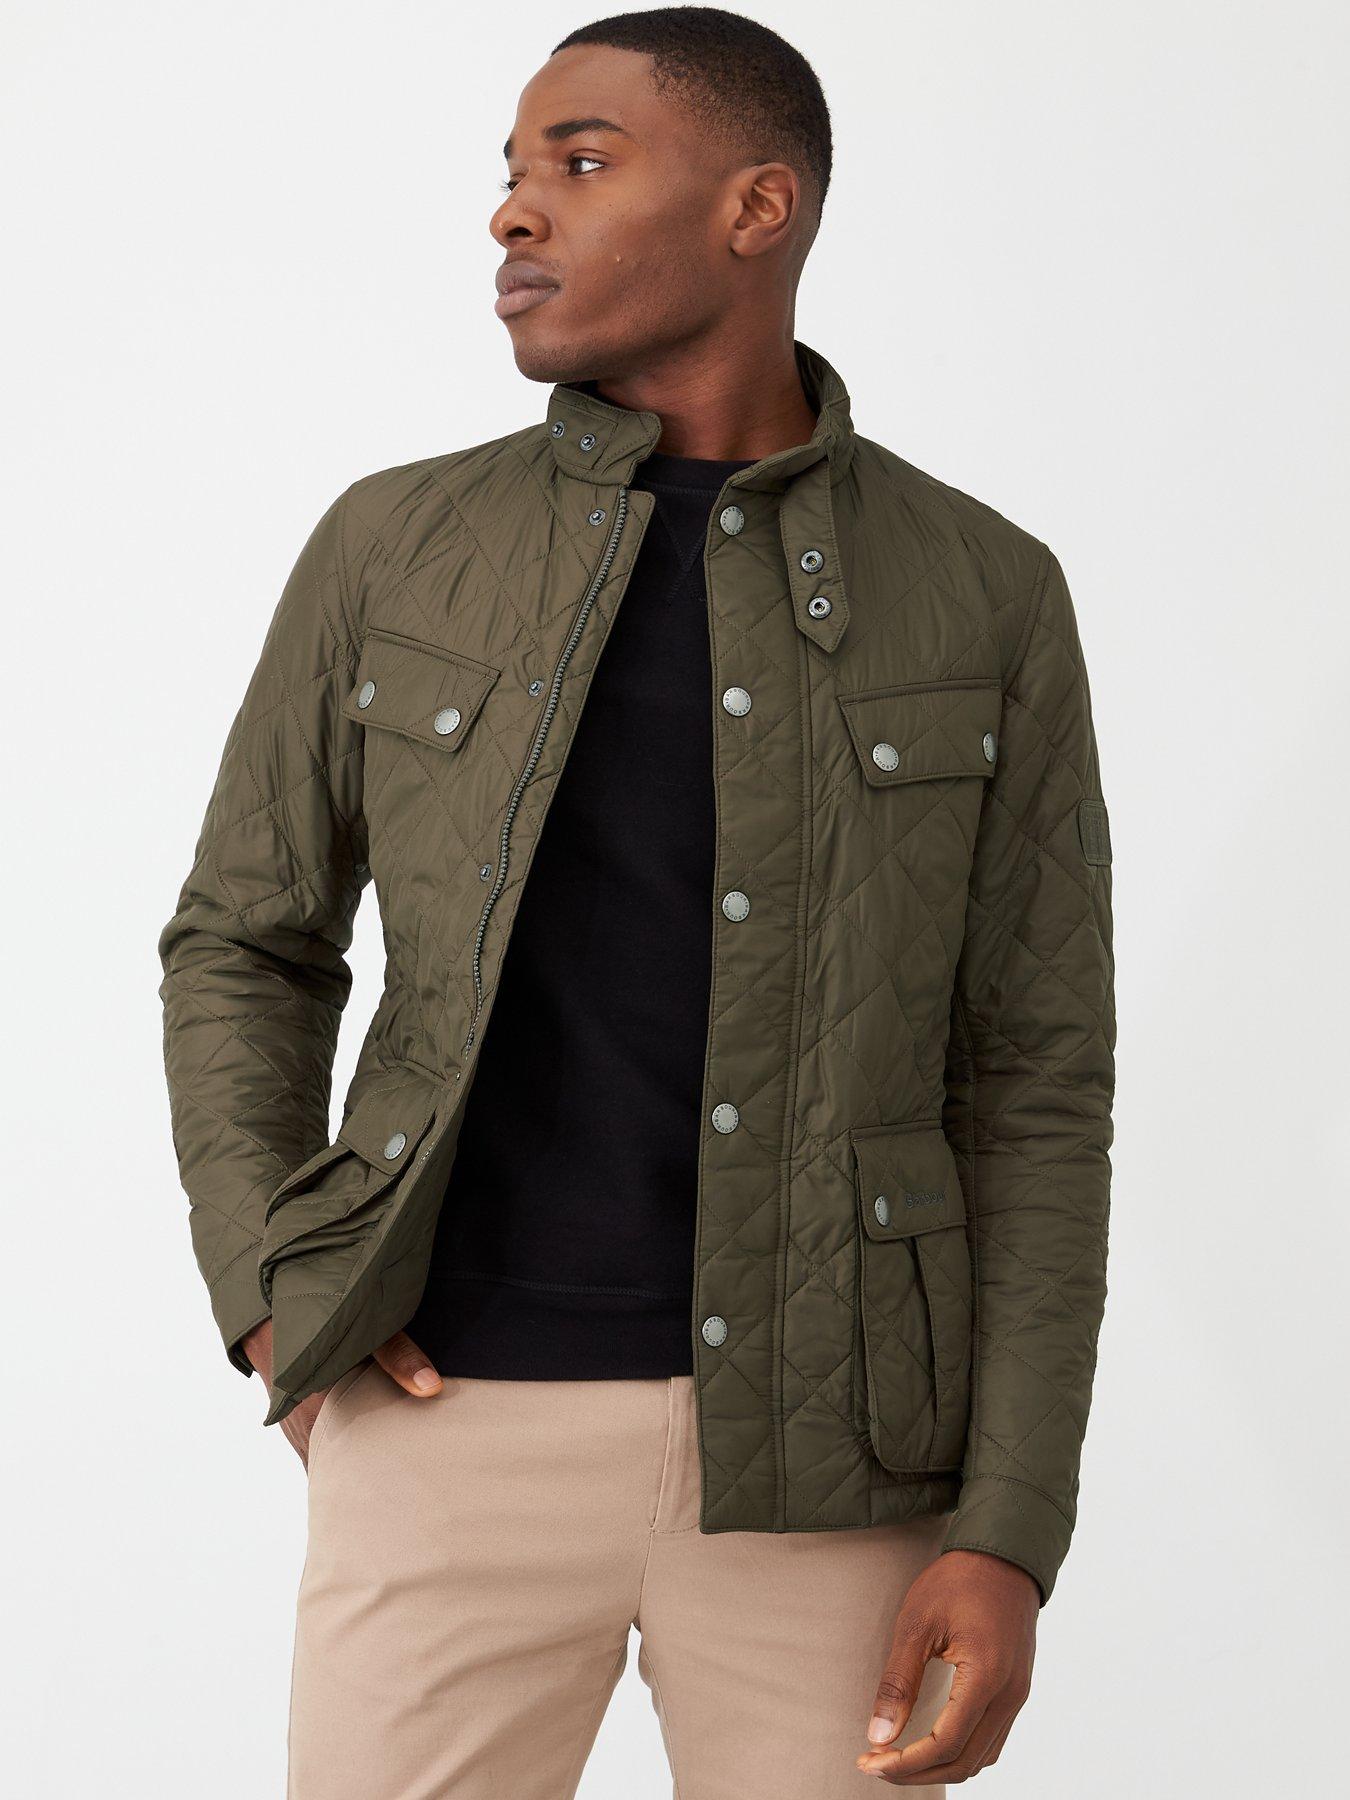 barbour quilted jacket washing instructions